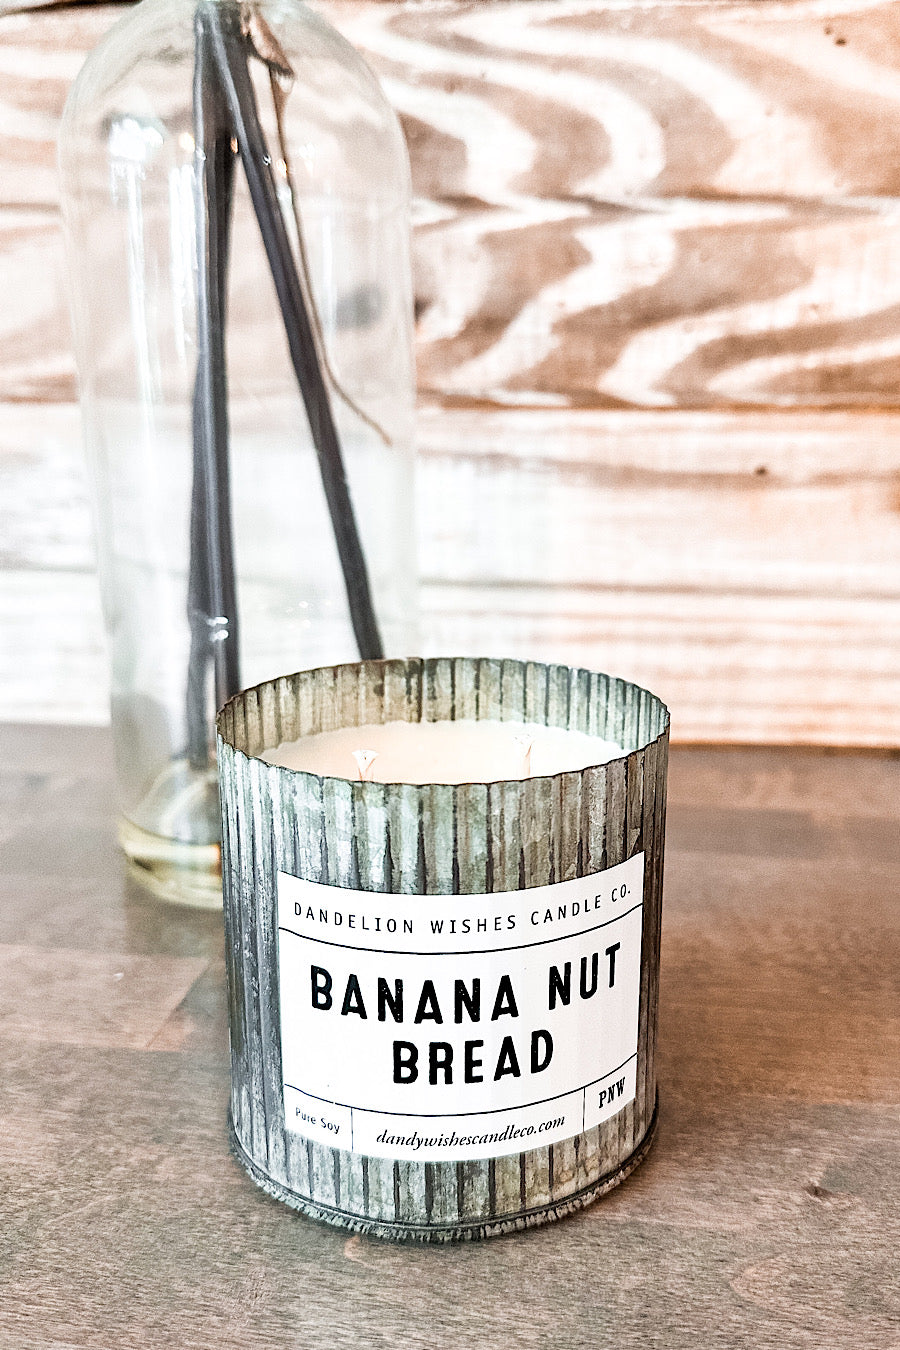 Rustic Galvanized Candle in Banana Nut Bread